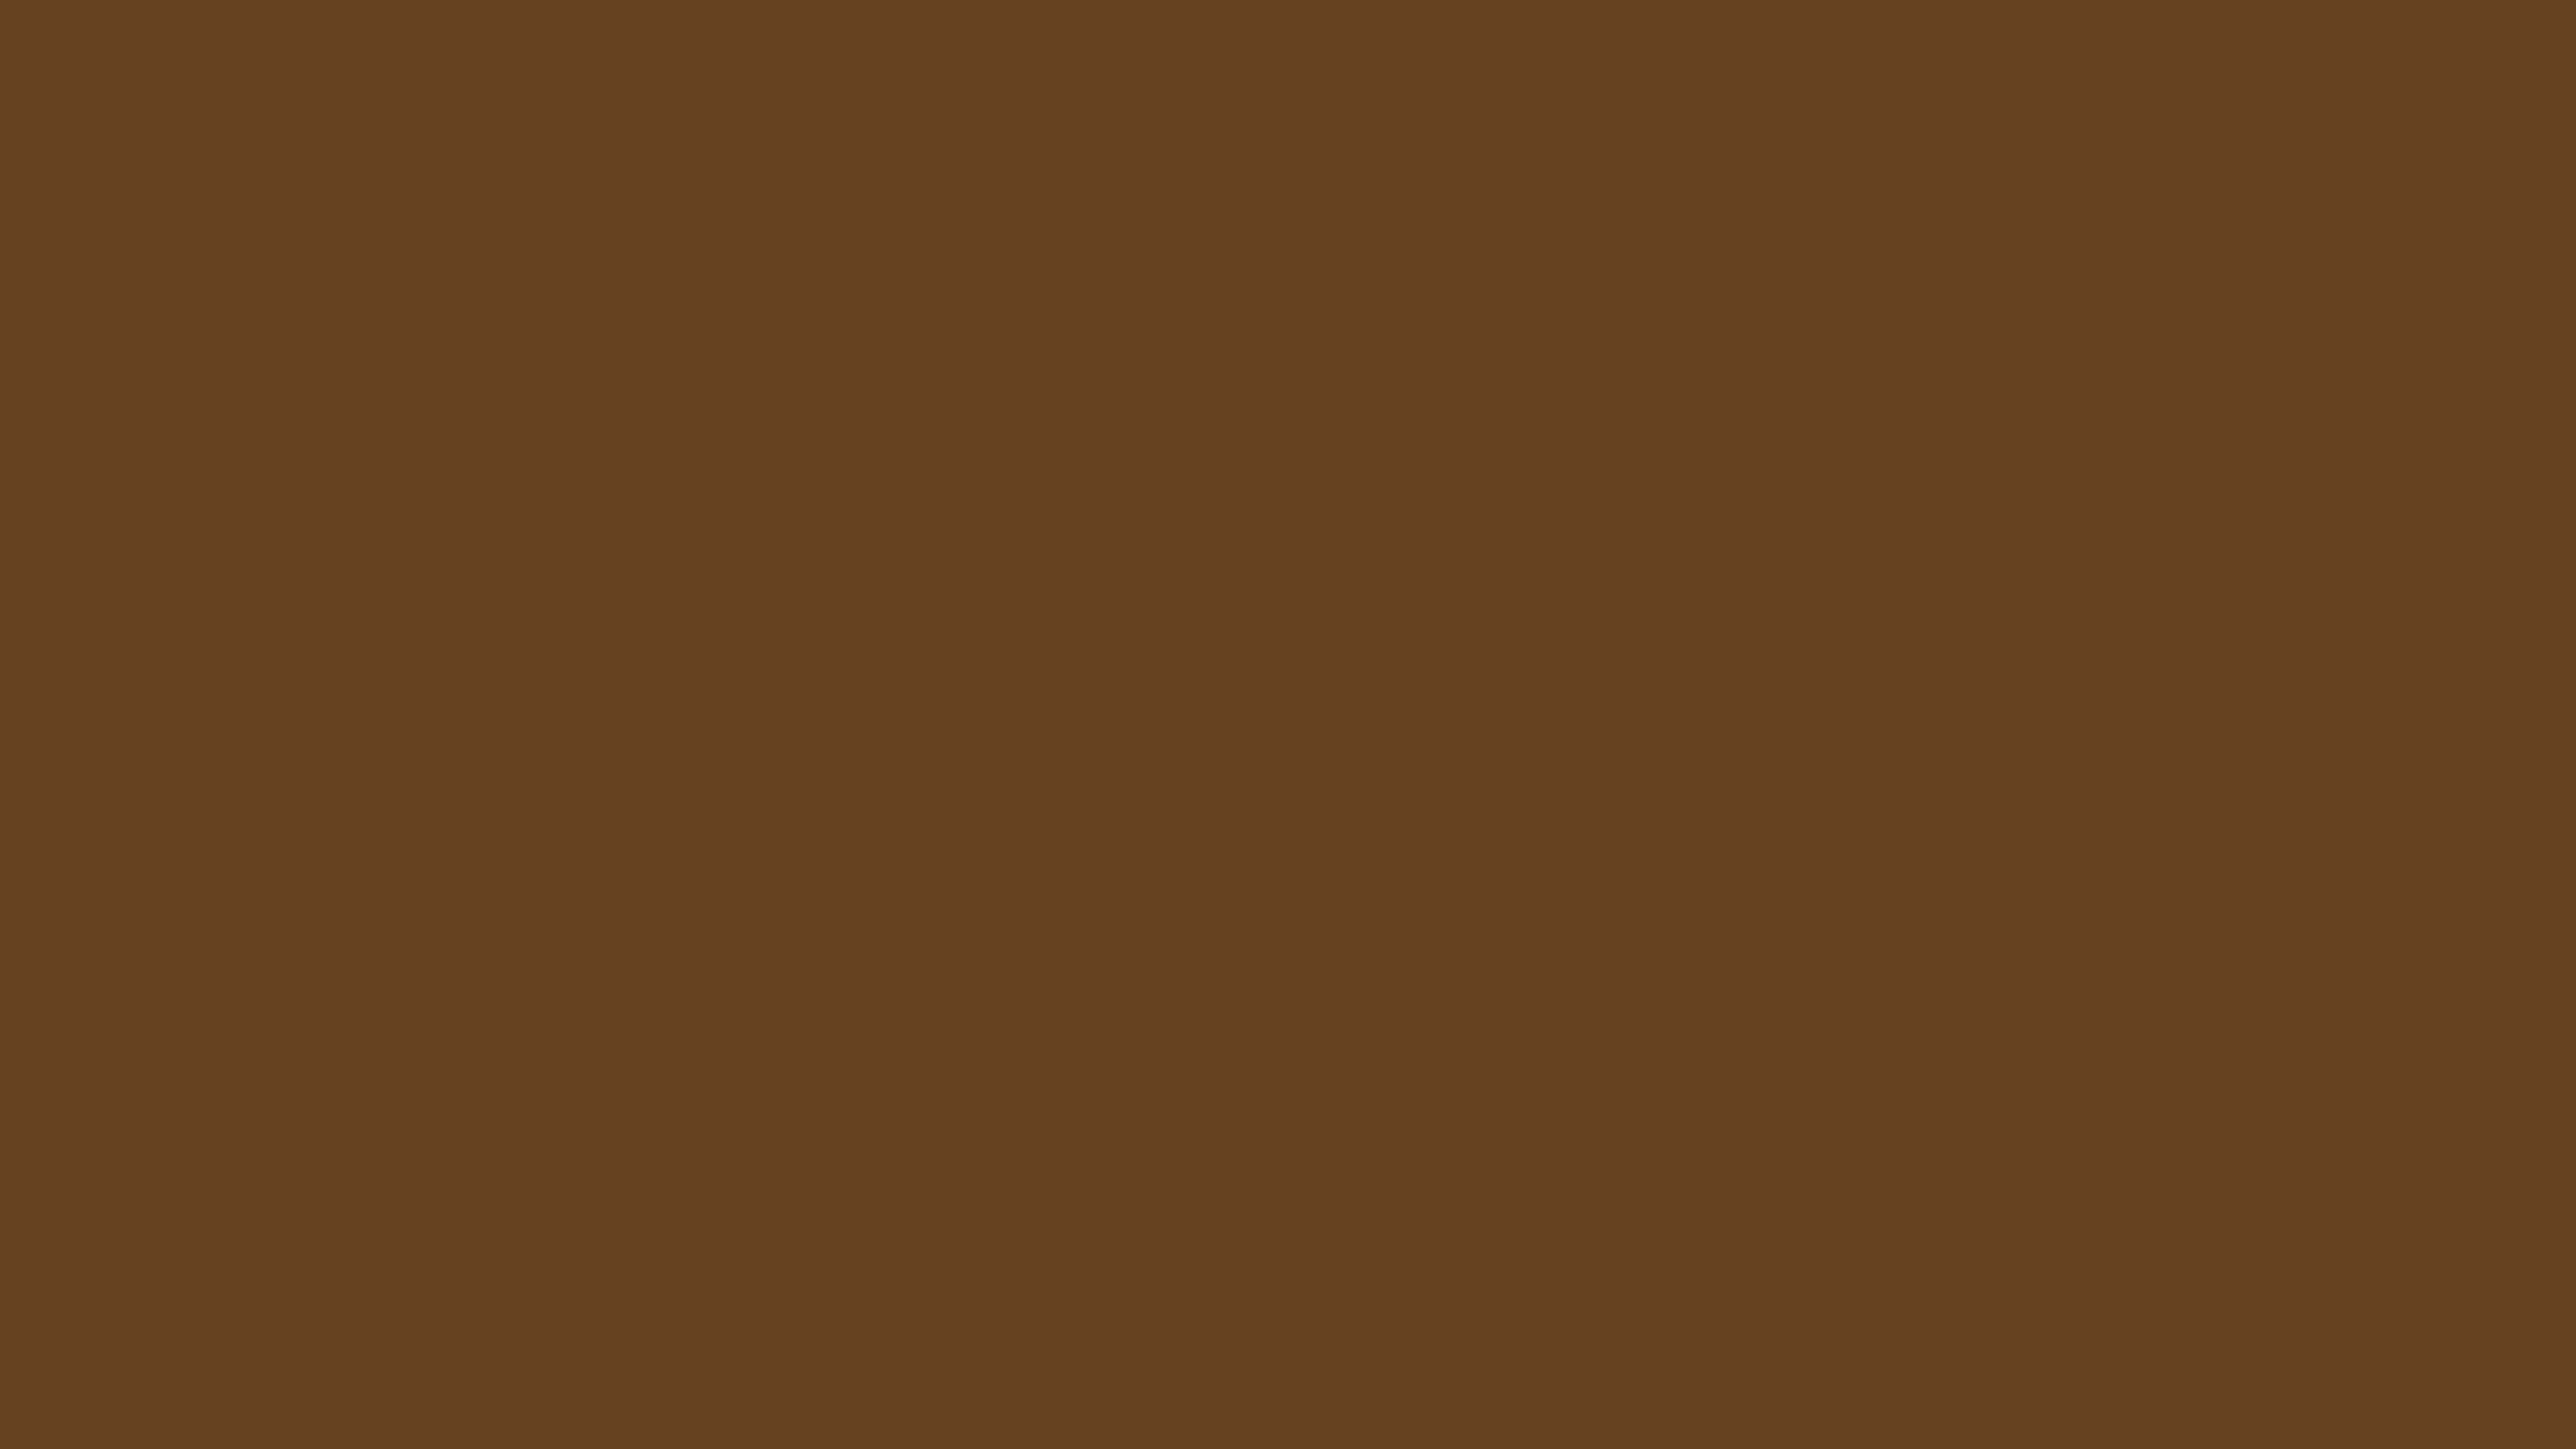 4096x2304 Otter Brown Solid Color Background